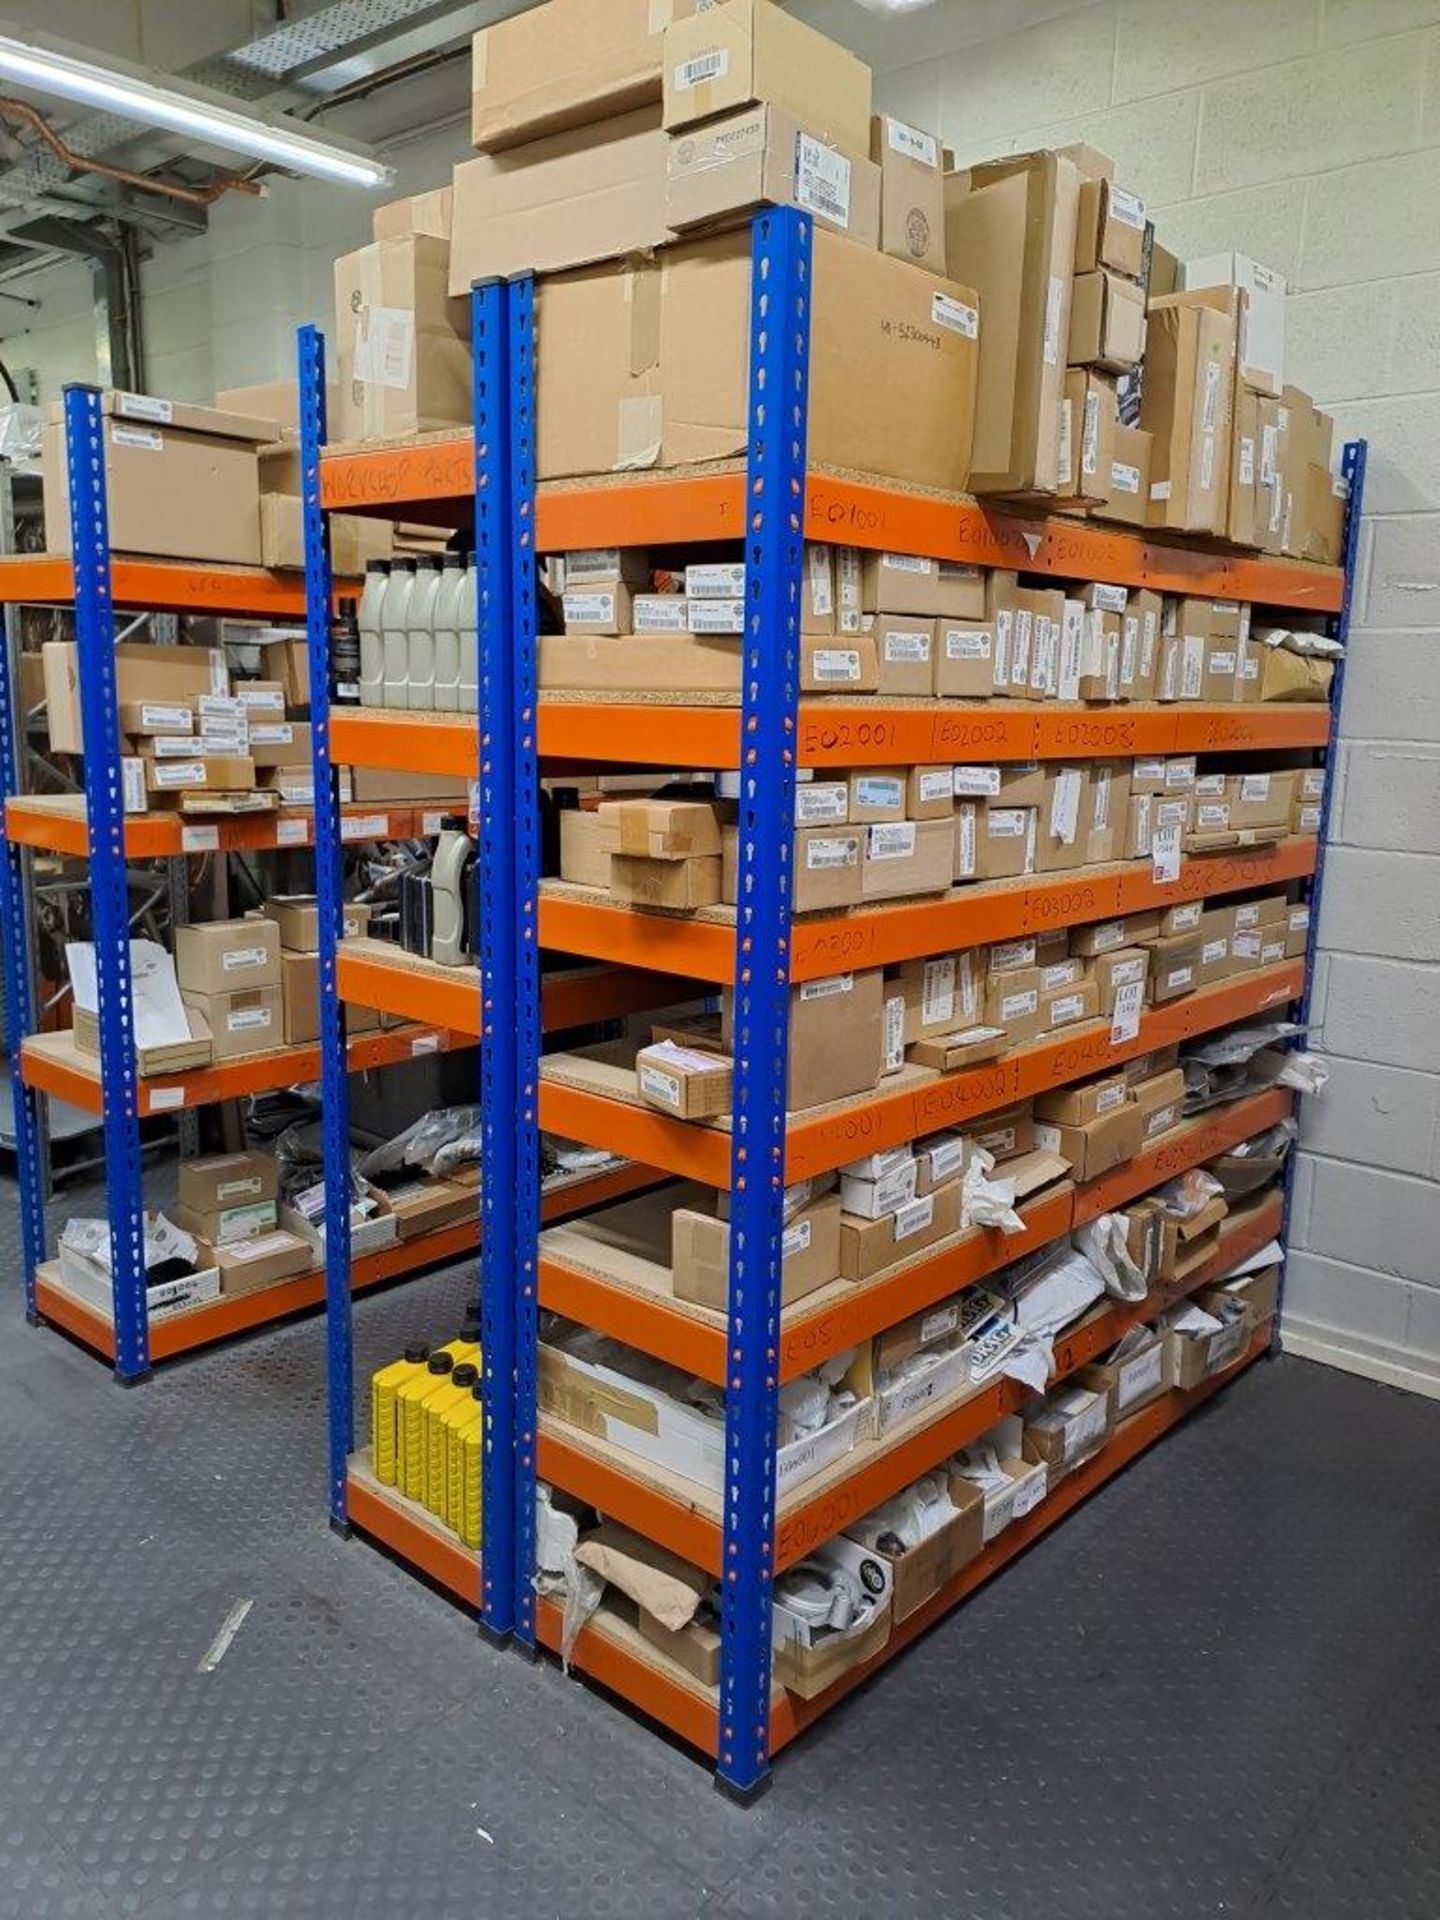 9 Bays of Blue and orange shelving, througout stores and workshop - Image 3 of 7